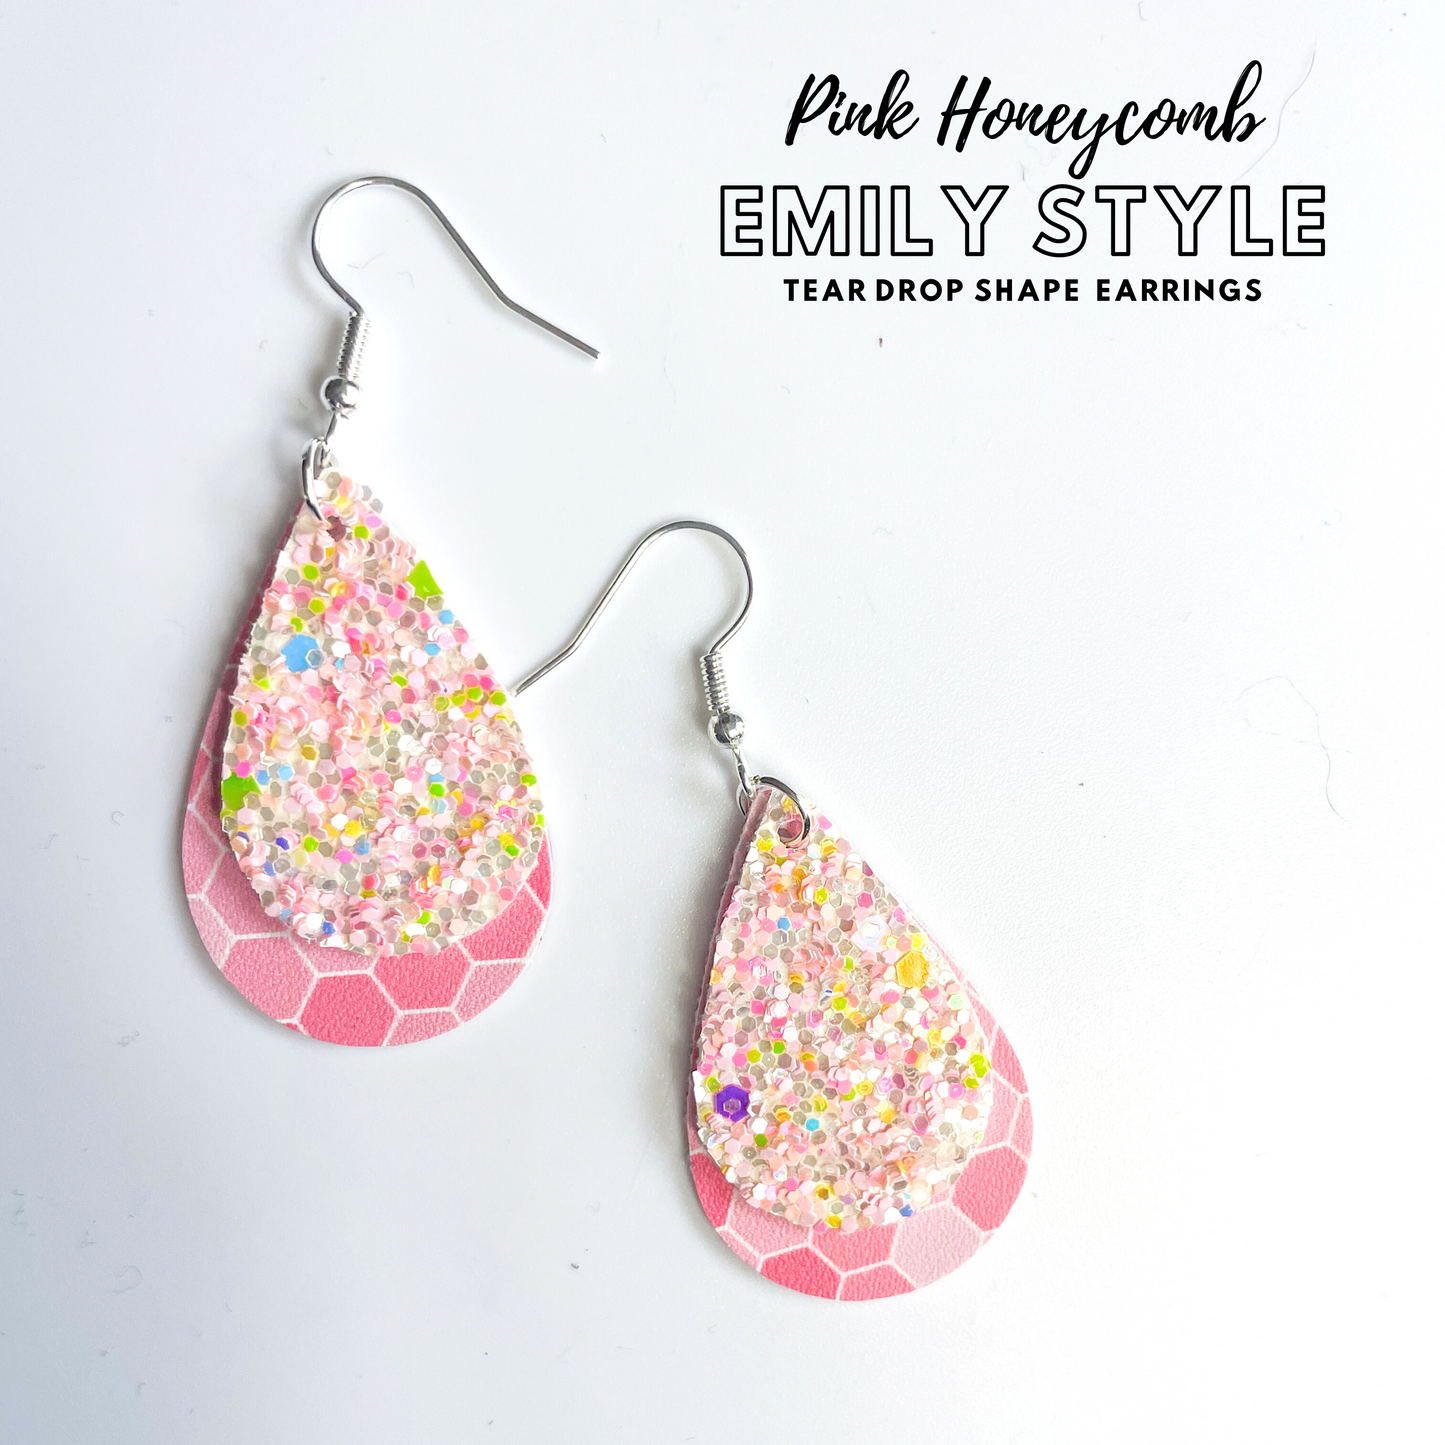 Pink Honeycomb Emily Style 2 Layer Dangle Earrings | Emily Style Dangle Earrings | Layered Teardrop Shape